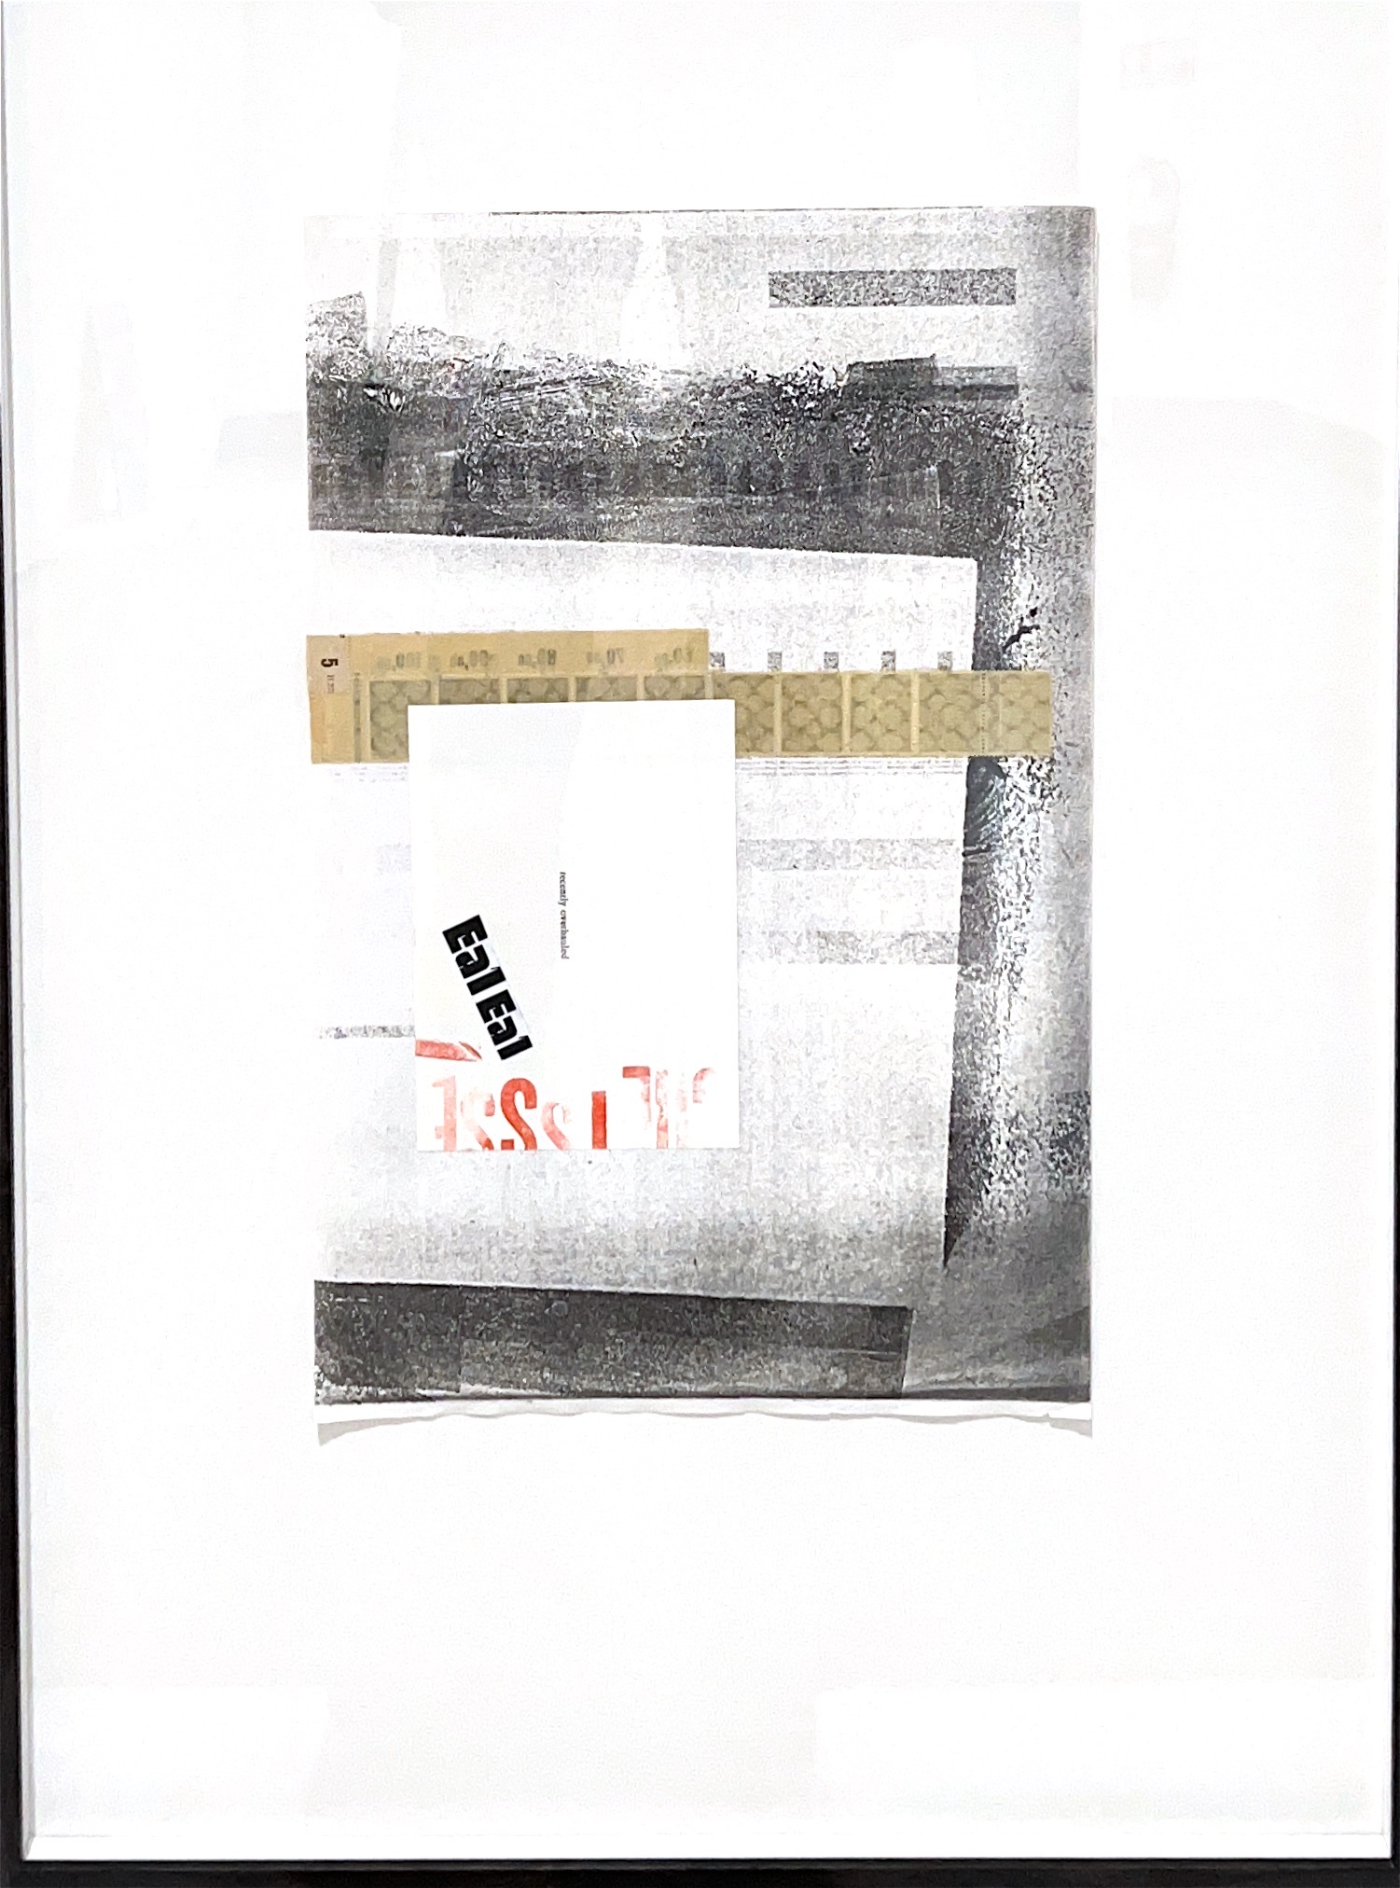 Textus Righted (no. 37): Image description: Black, white, and red collage with text